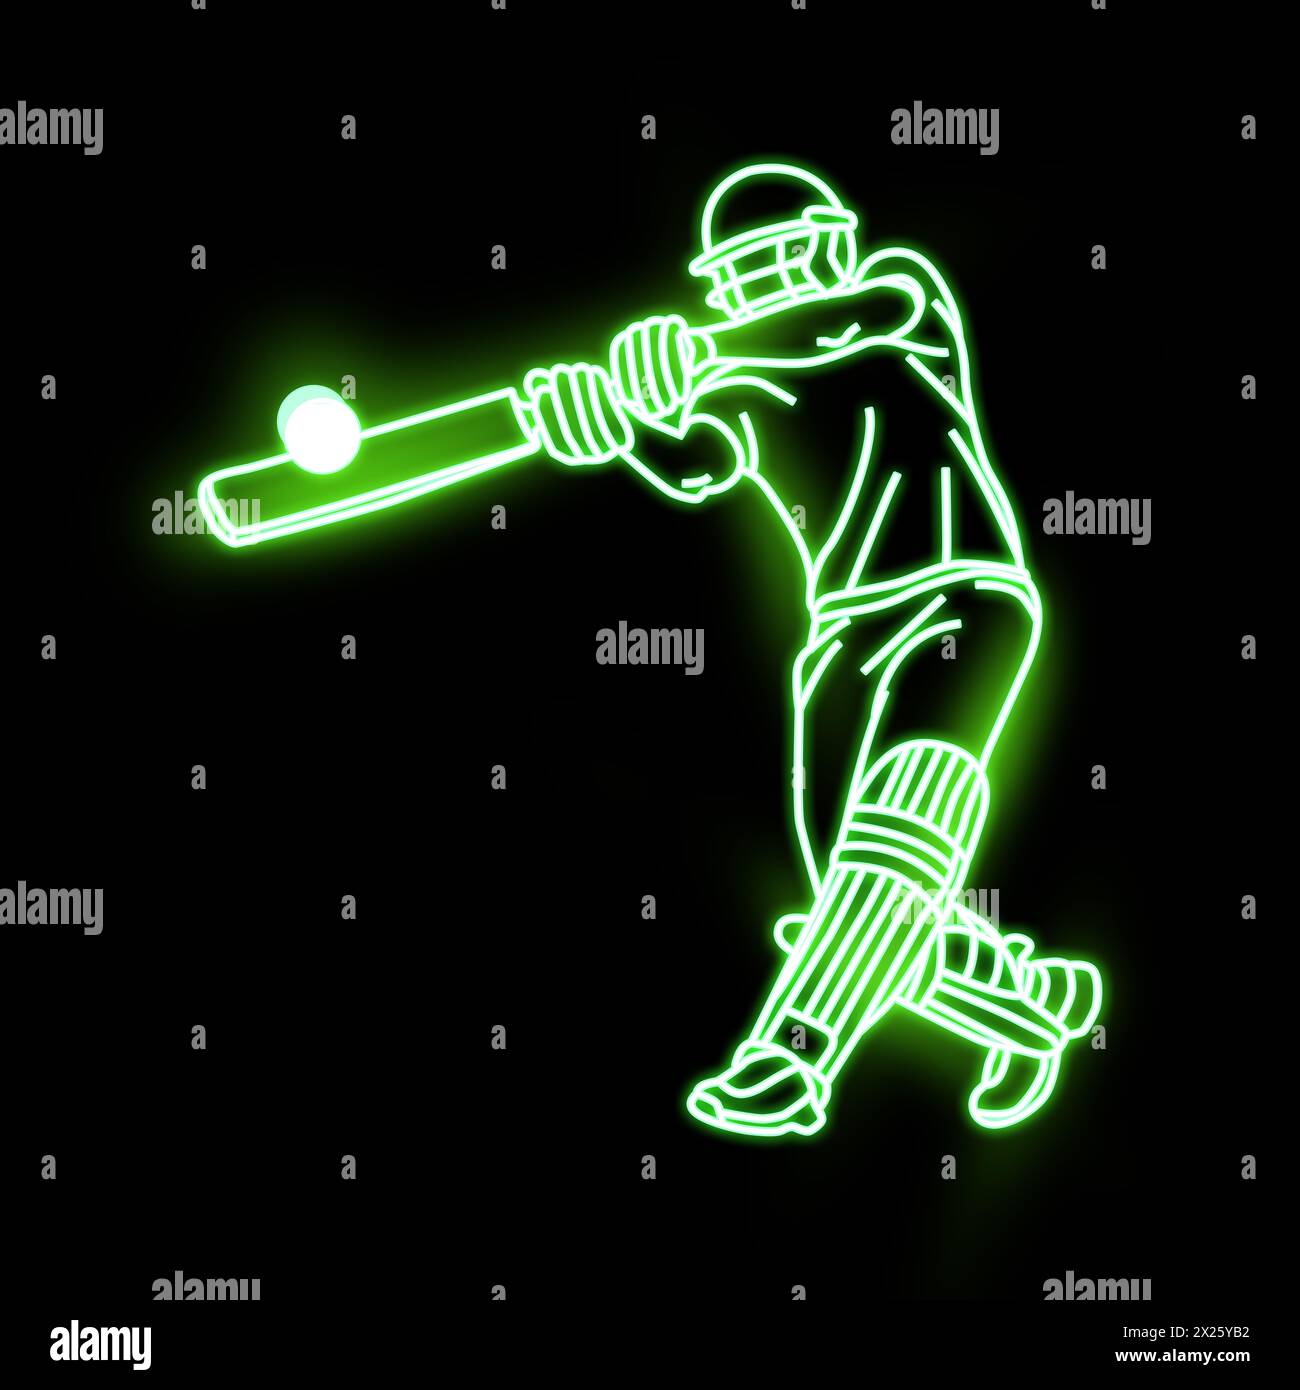 Cricket player neon vector art green, blue, red. Cricket batsman neon art. Cricket Batsman, Neon light effect, full black background. Stock Photo